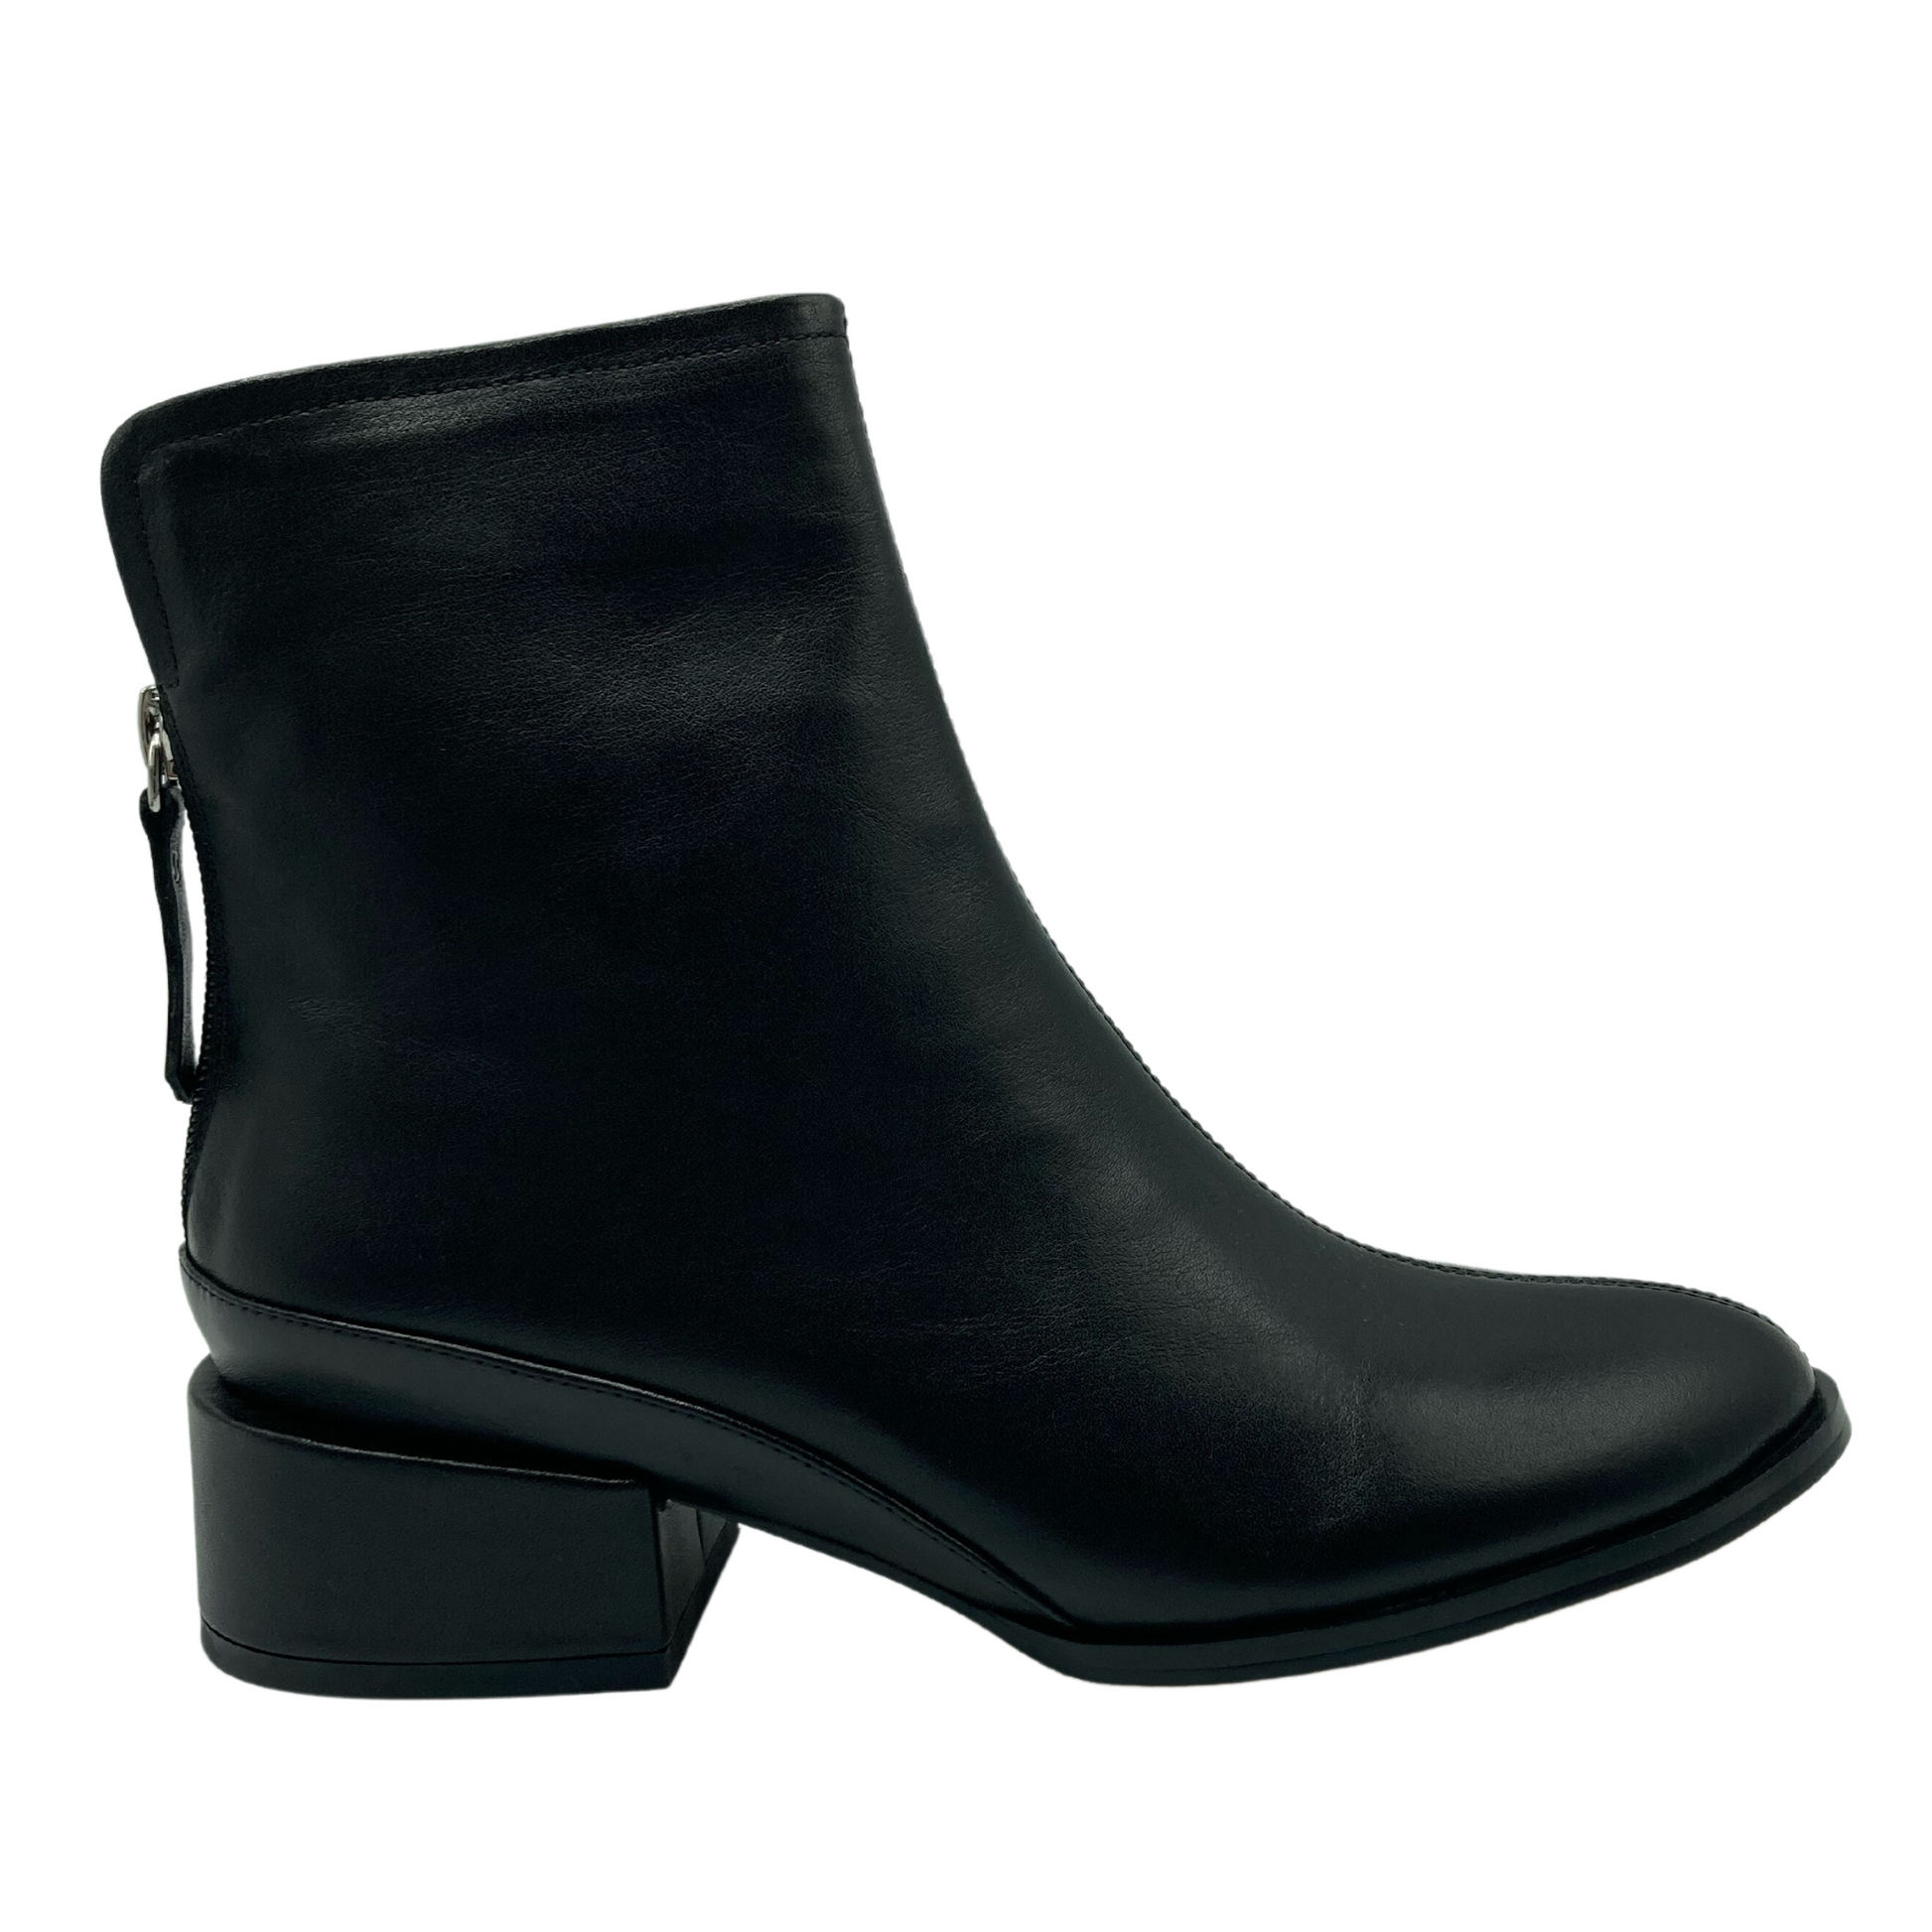 Right facing view of black ankle boot with block heel and zipper entry